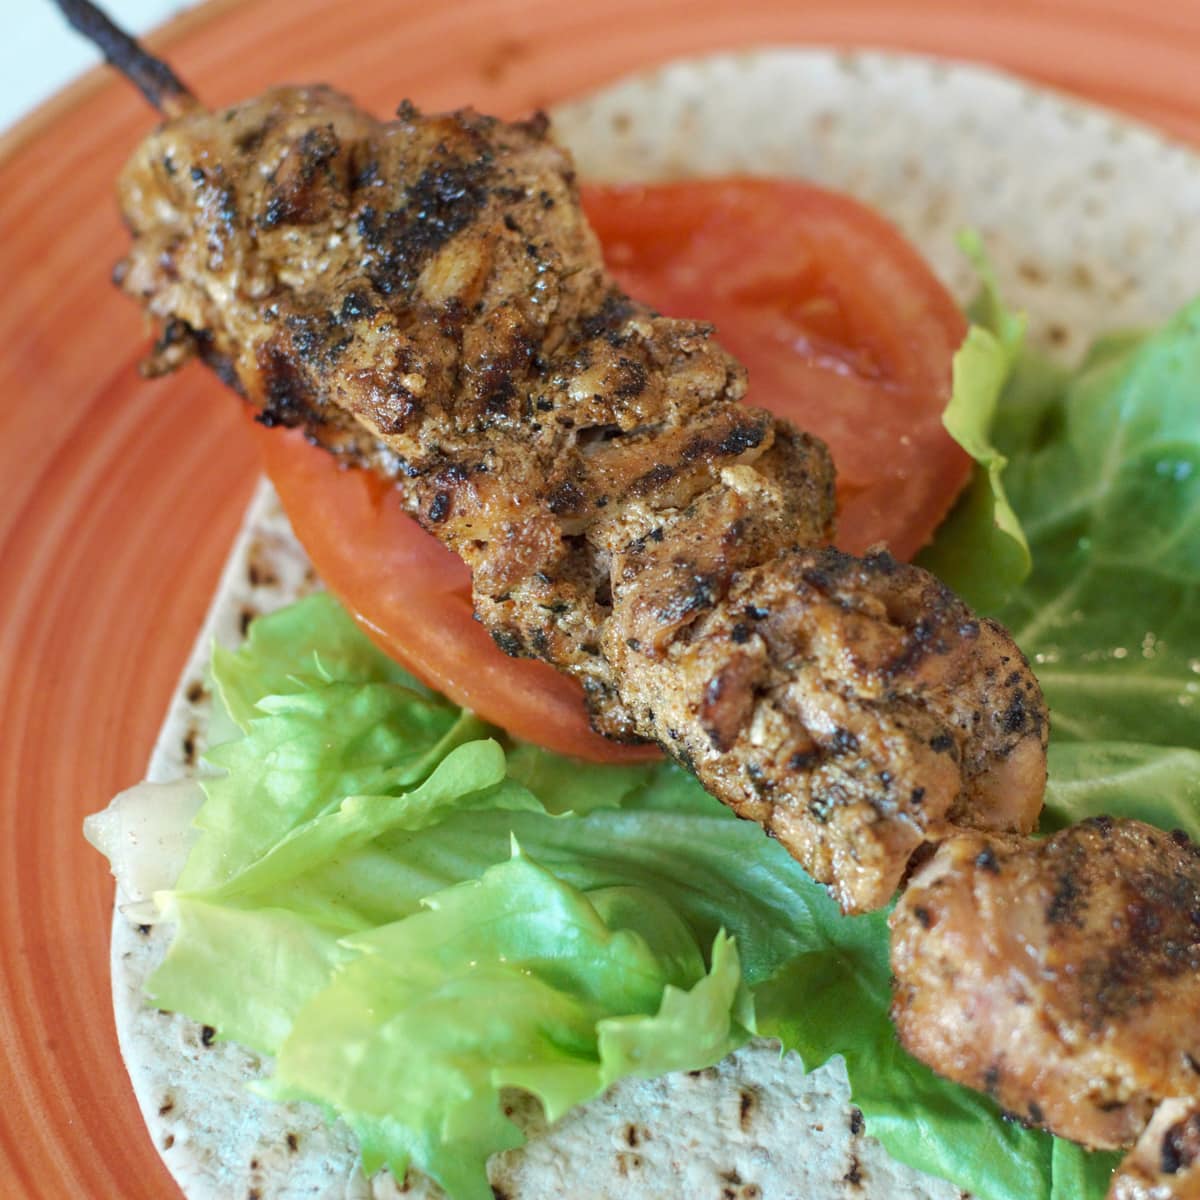 Grilled shish tawook kebabs served with flatbread, lettuce, and tomato.